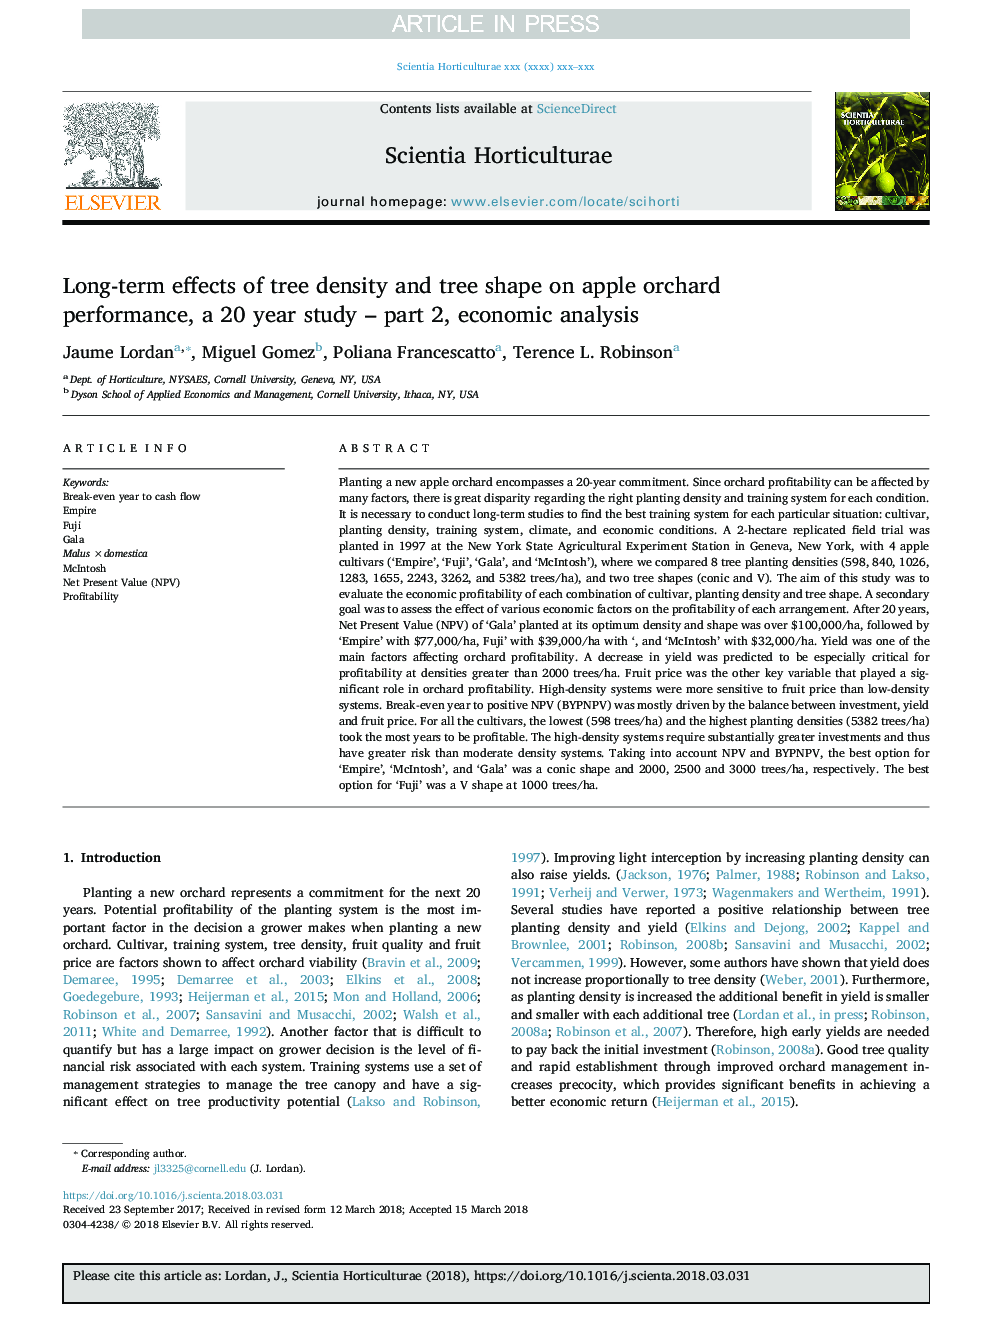 Long-term effects of tree density and tree shape on apple orchard performance, a 20 year study - part 2, economic analysis